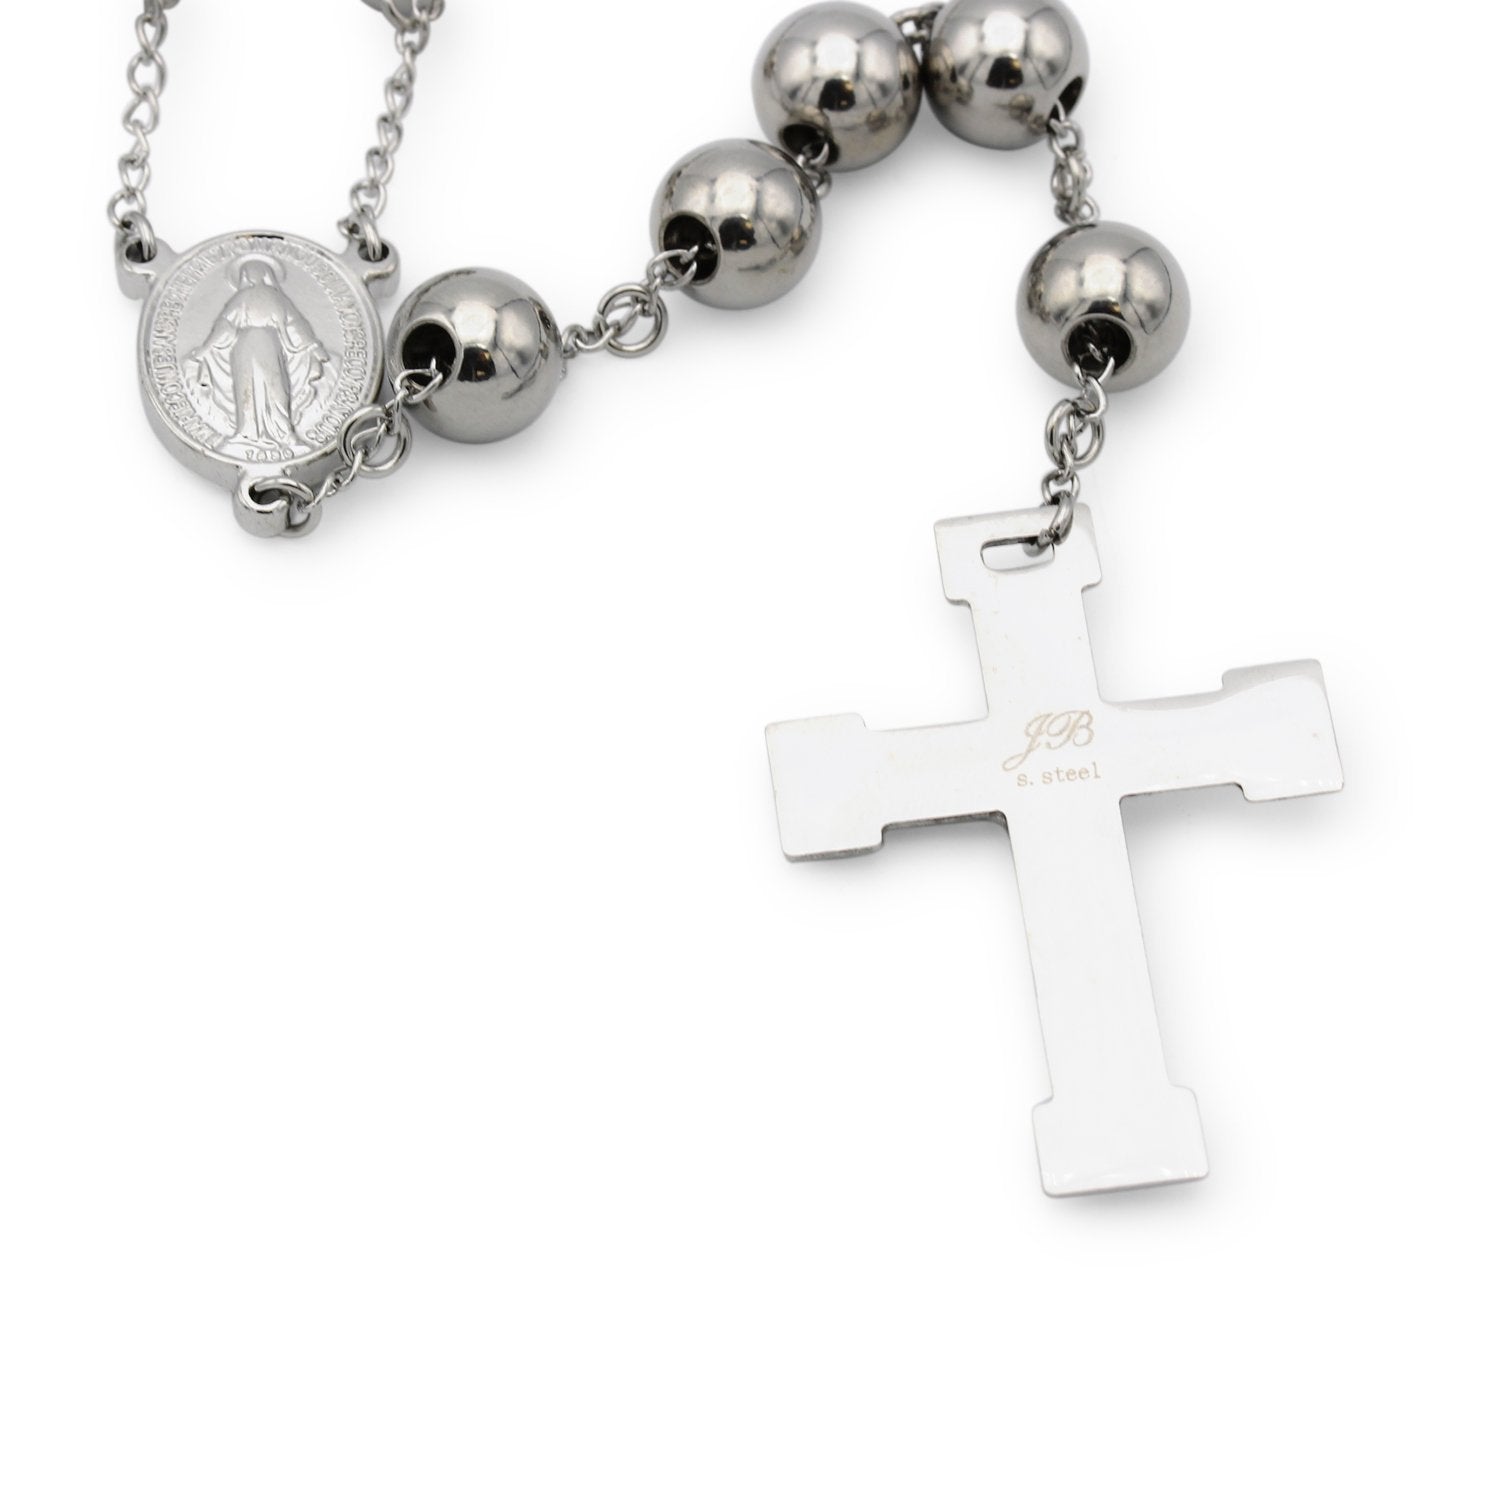 Traditional Silver Rosary Necklace Five Decade Catholic Prayer Beads 10mm